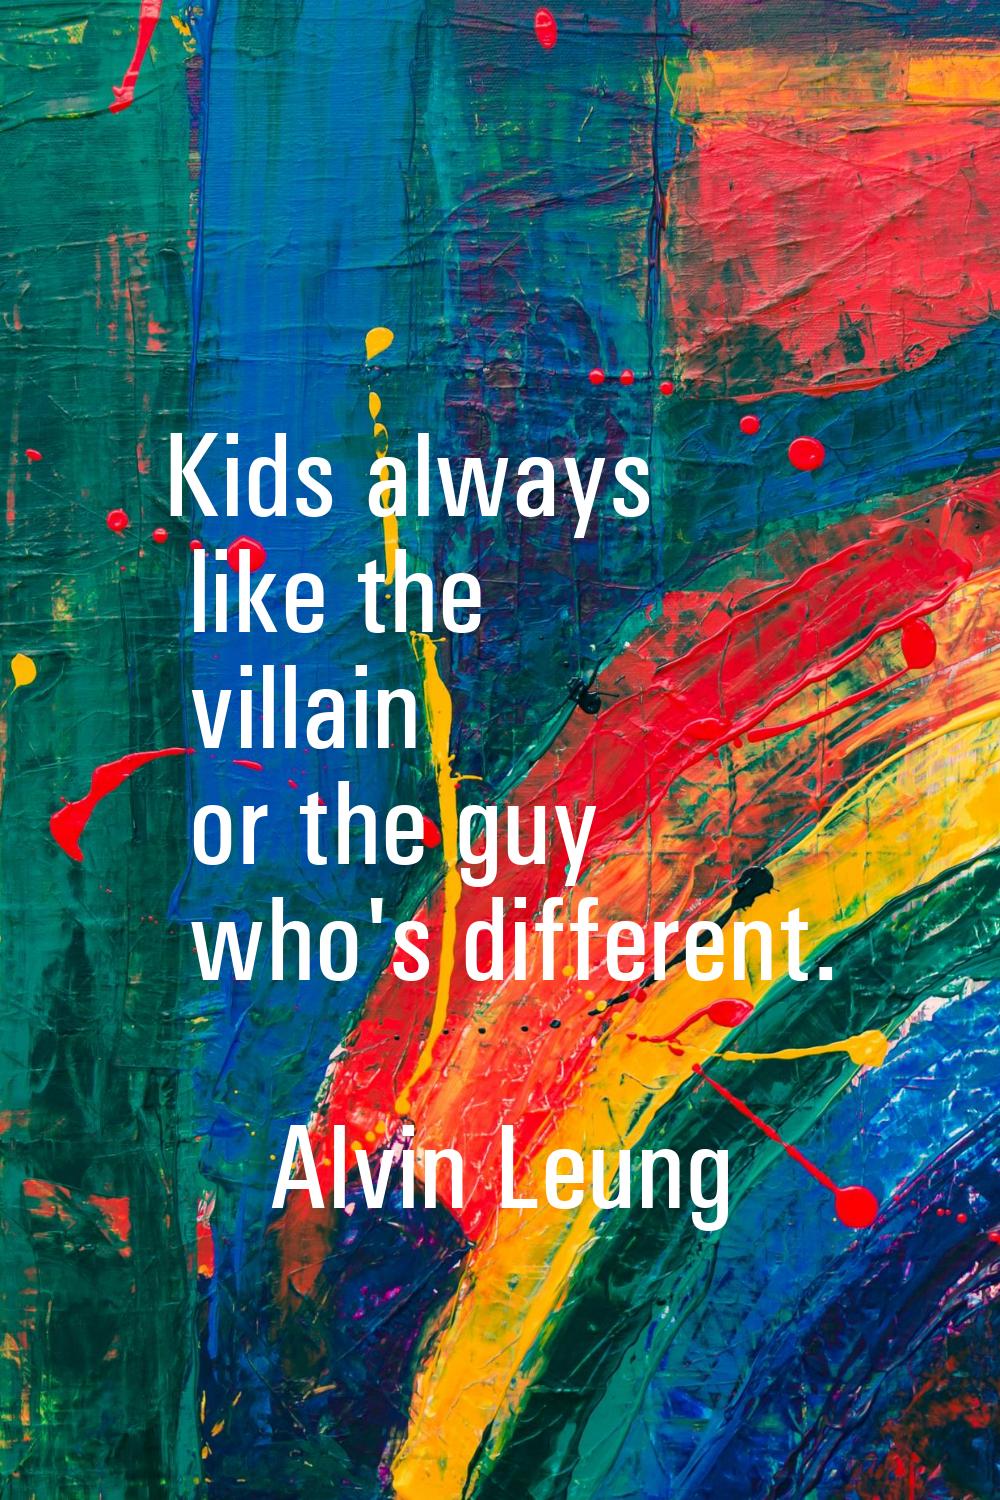 Kids always like the villain or the guy who's different.